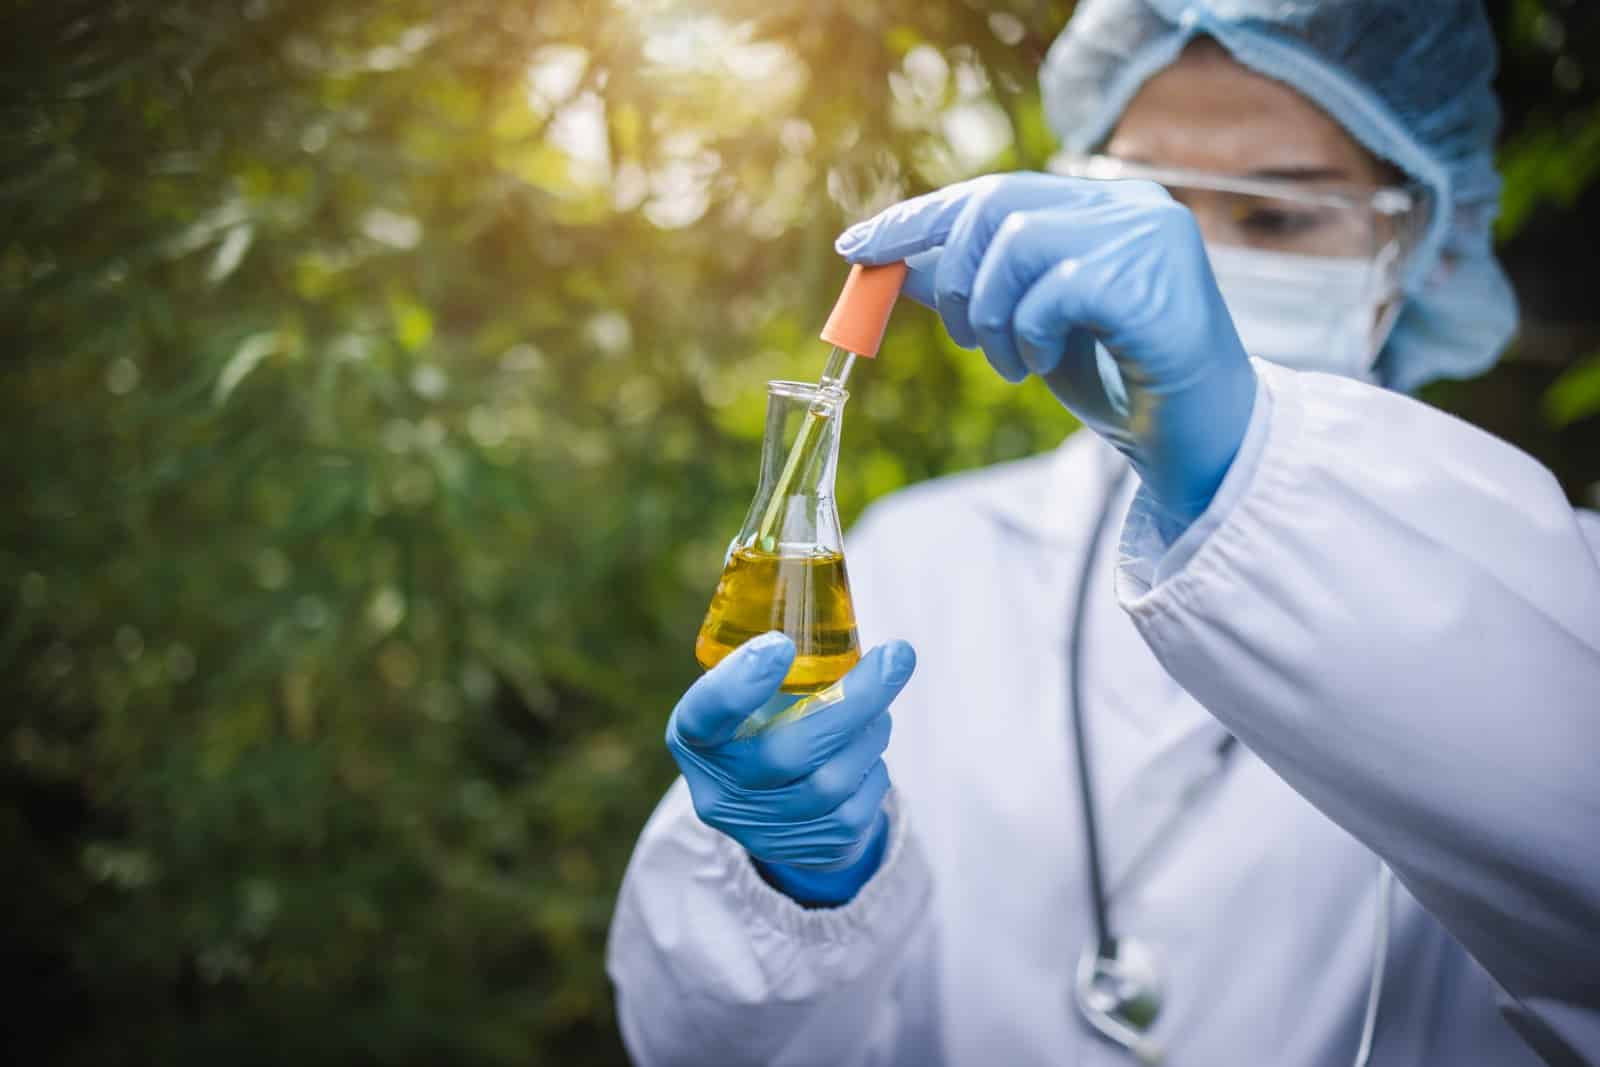 Researchers examine extracts from the hemp plant. Used to A doctor or researcher examines the cannabis plant extract. Used to make CBD hemp oil in alternative medicine. Bio-medicine and ecology, herbs, pharmaceutical industry. Alternative medicine.